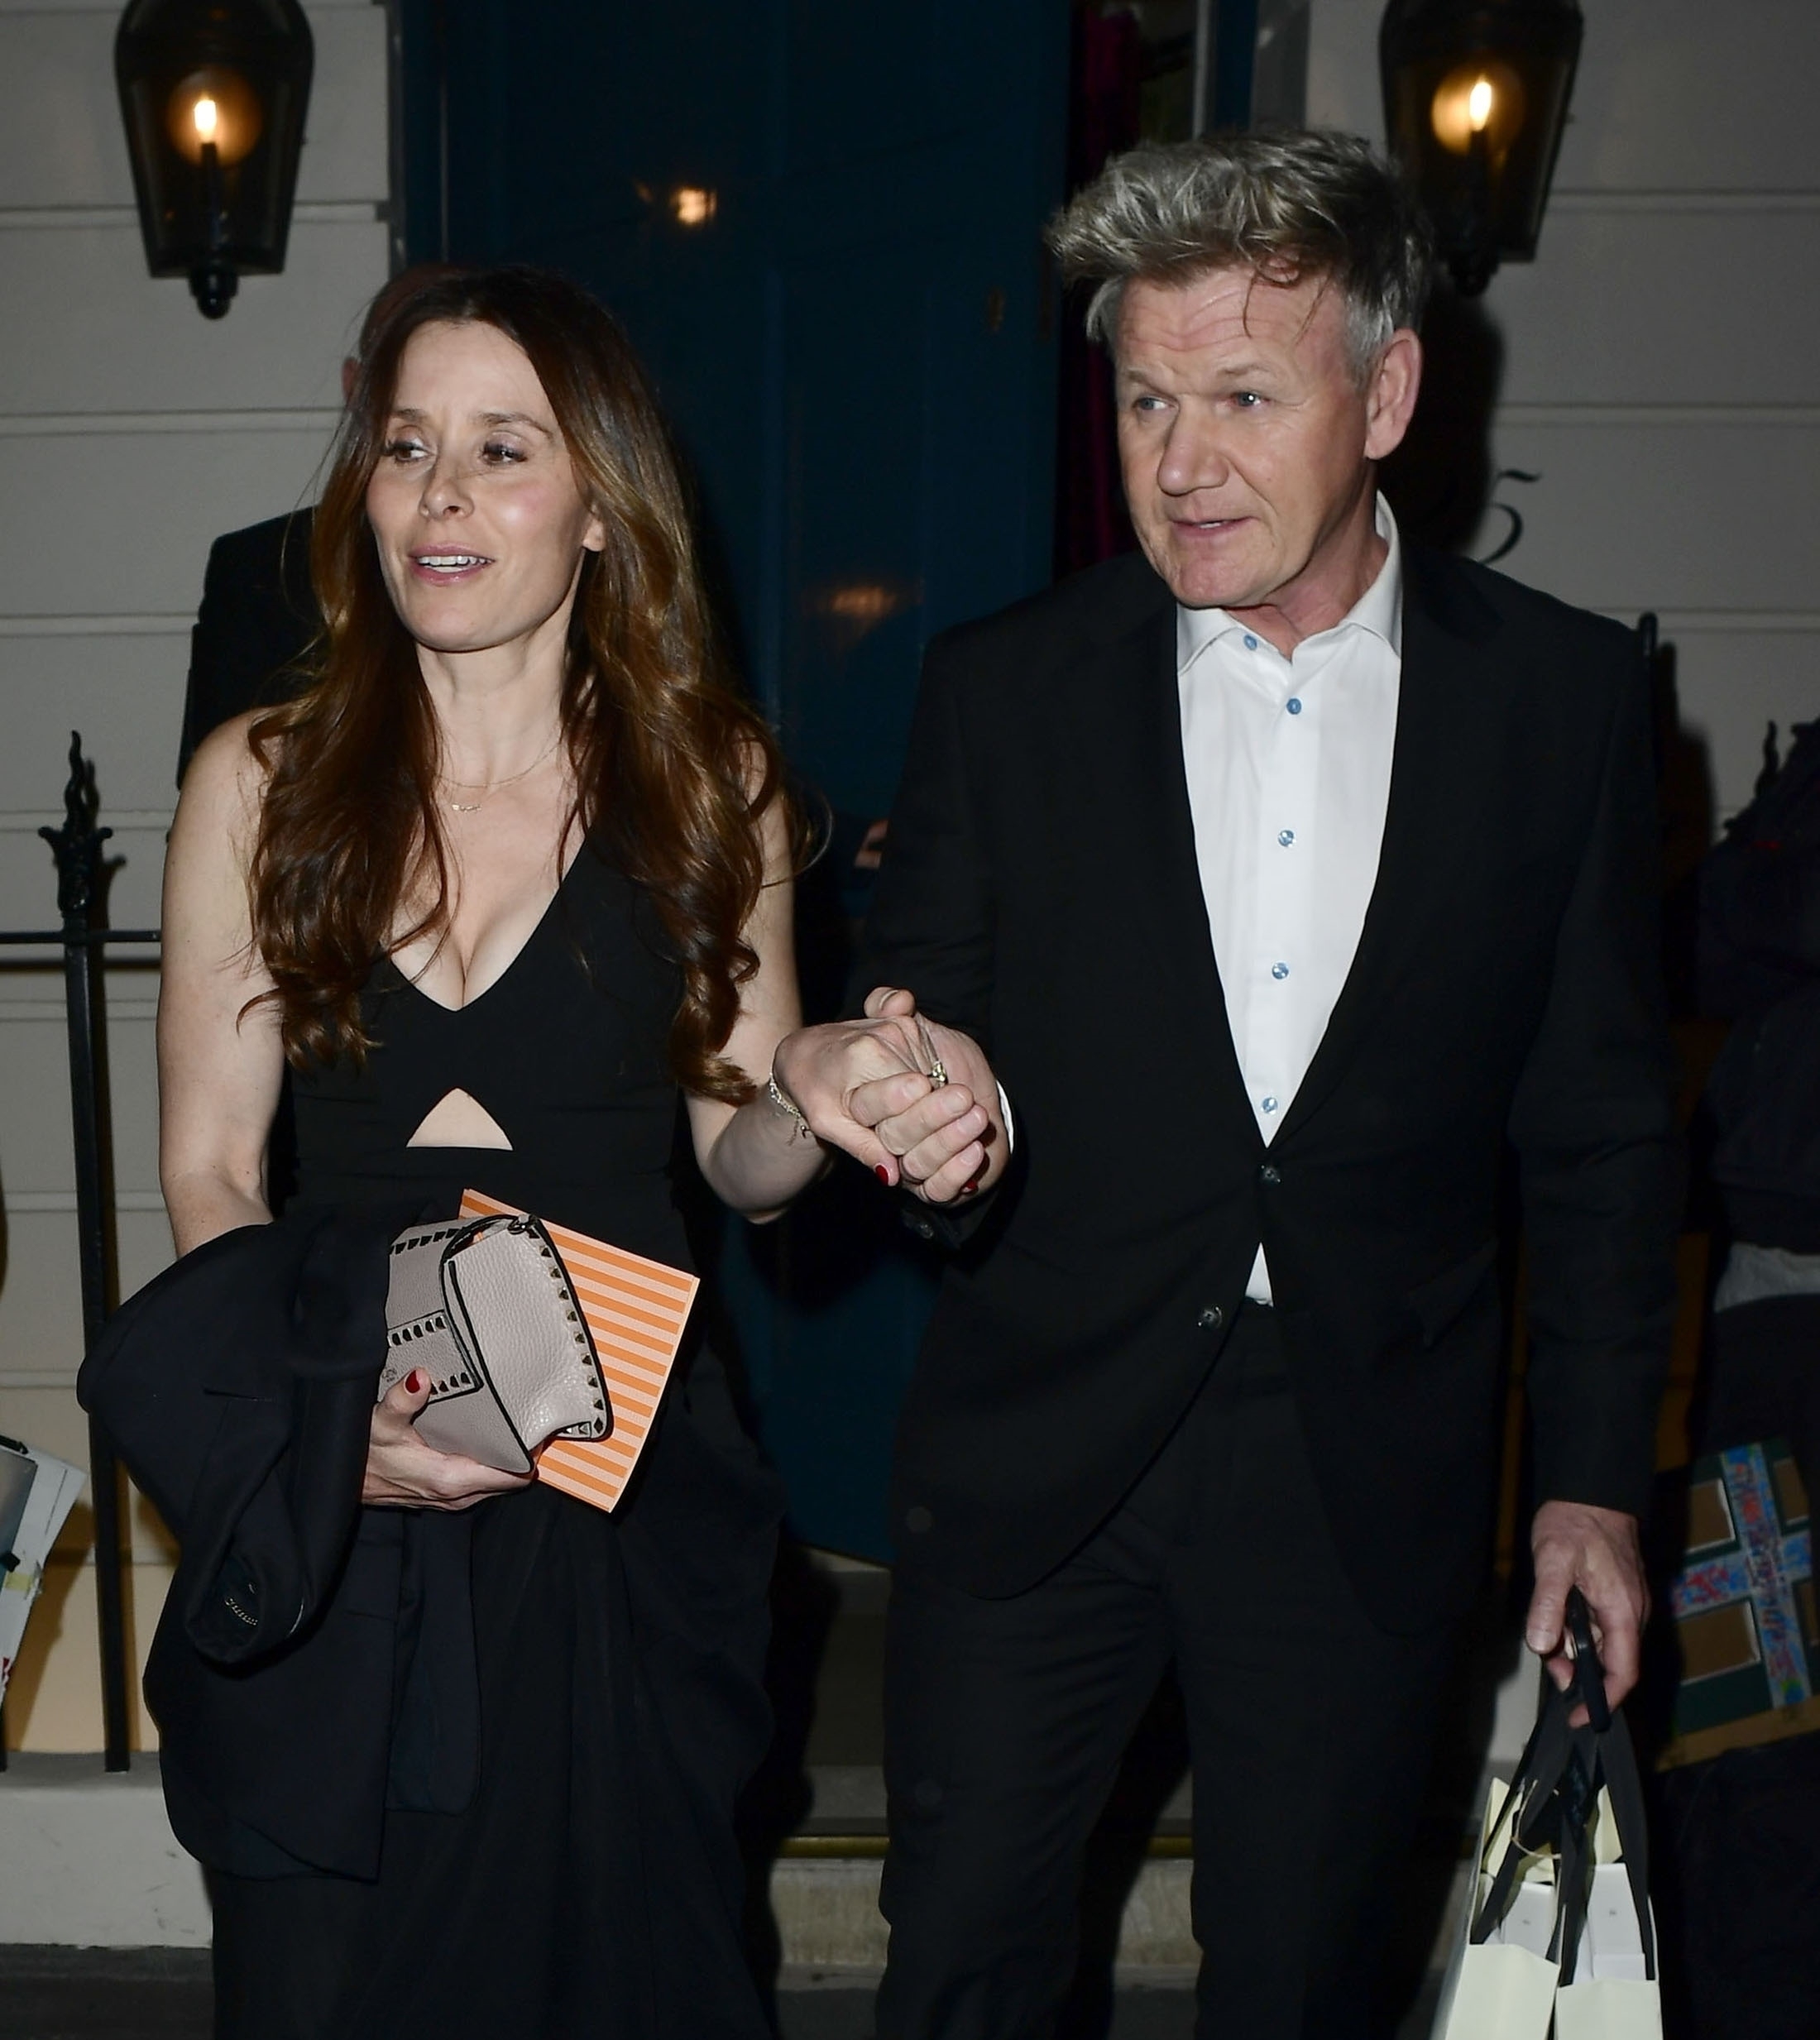 Gordon Ramsay and wife Tana were seen clutching goodie bags as they left